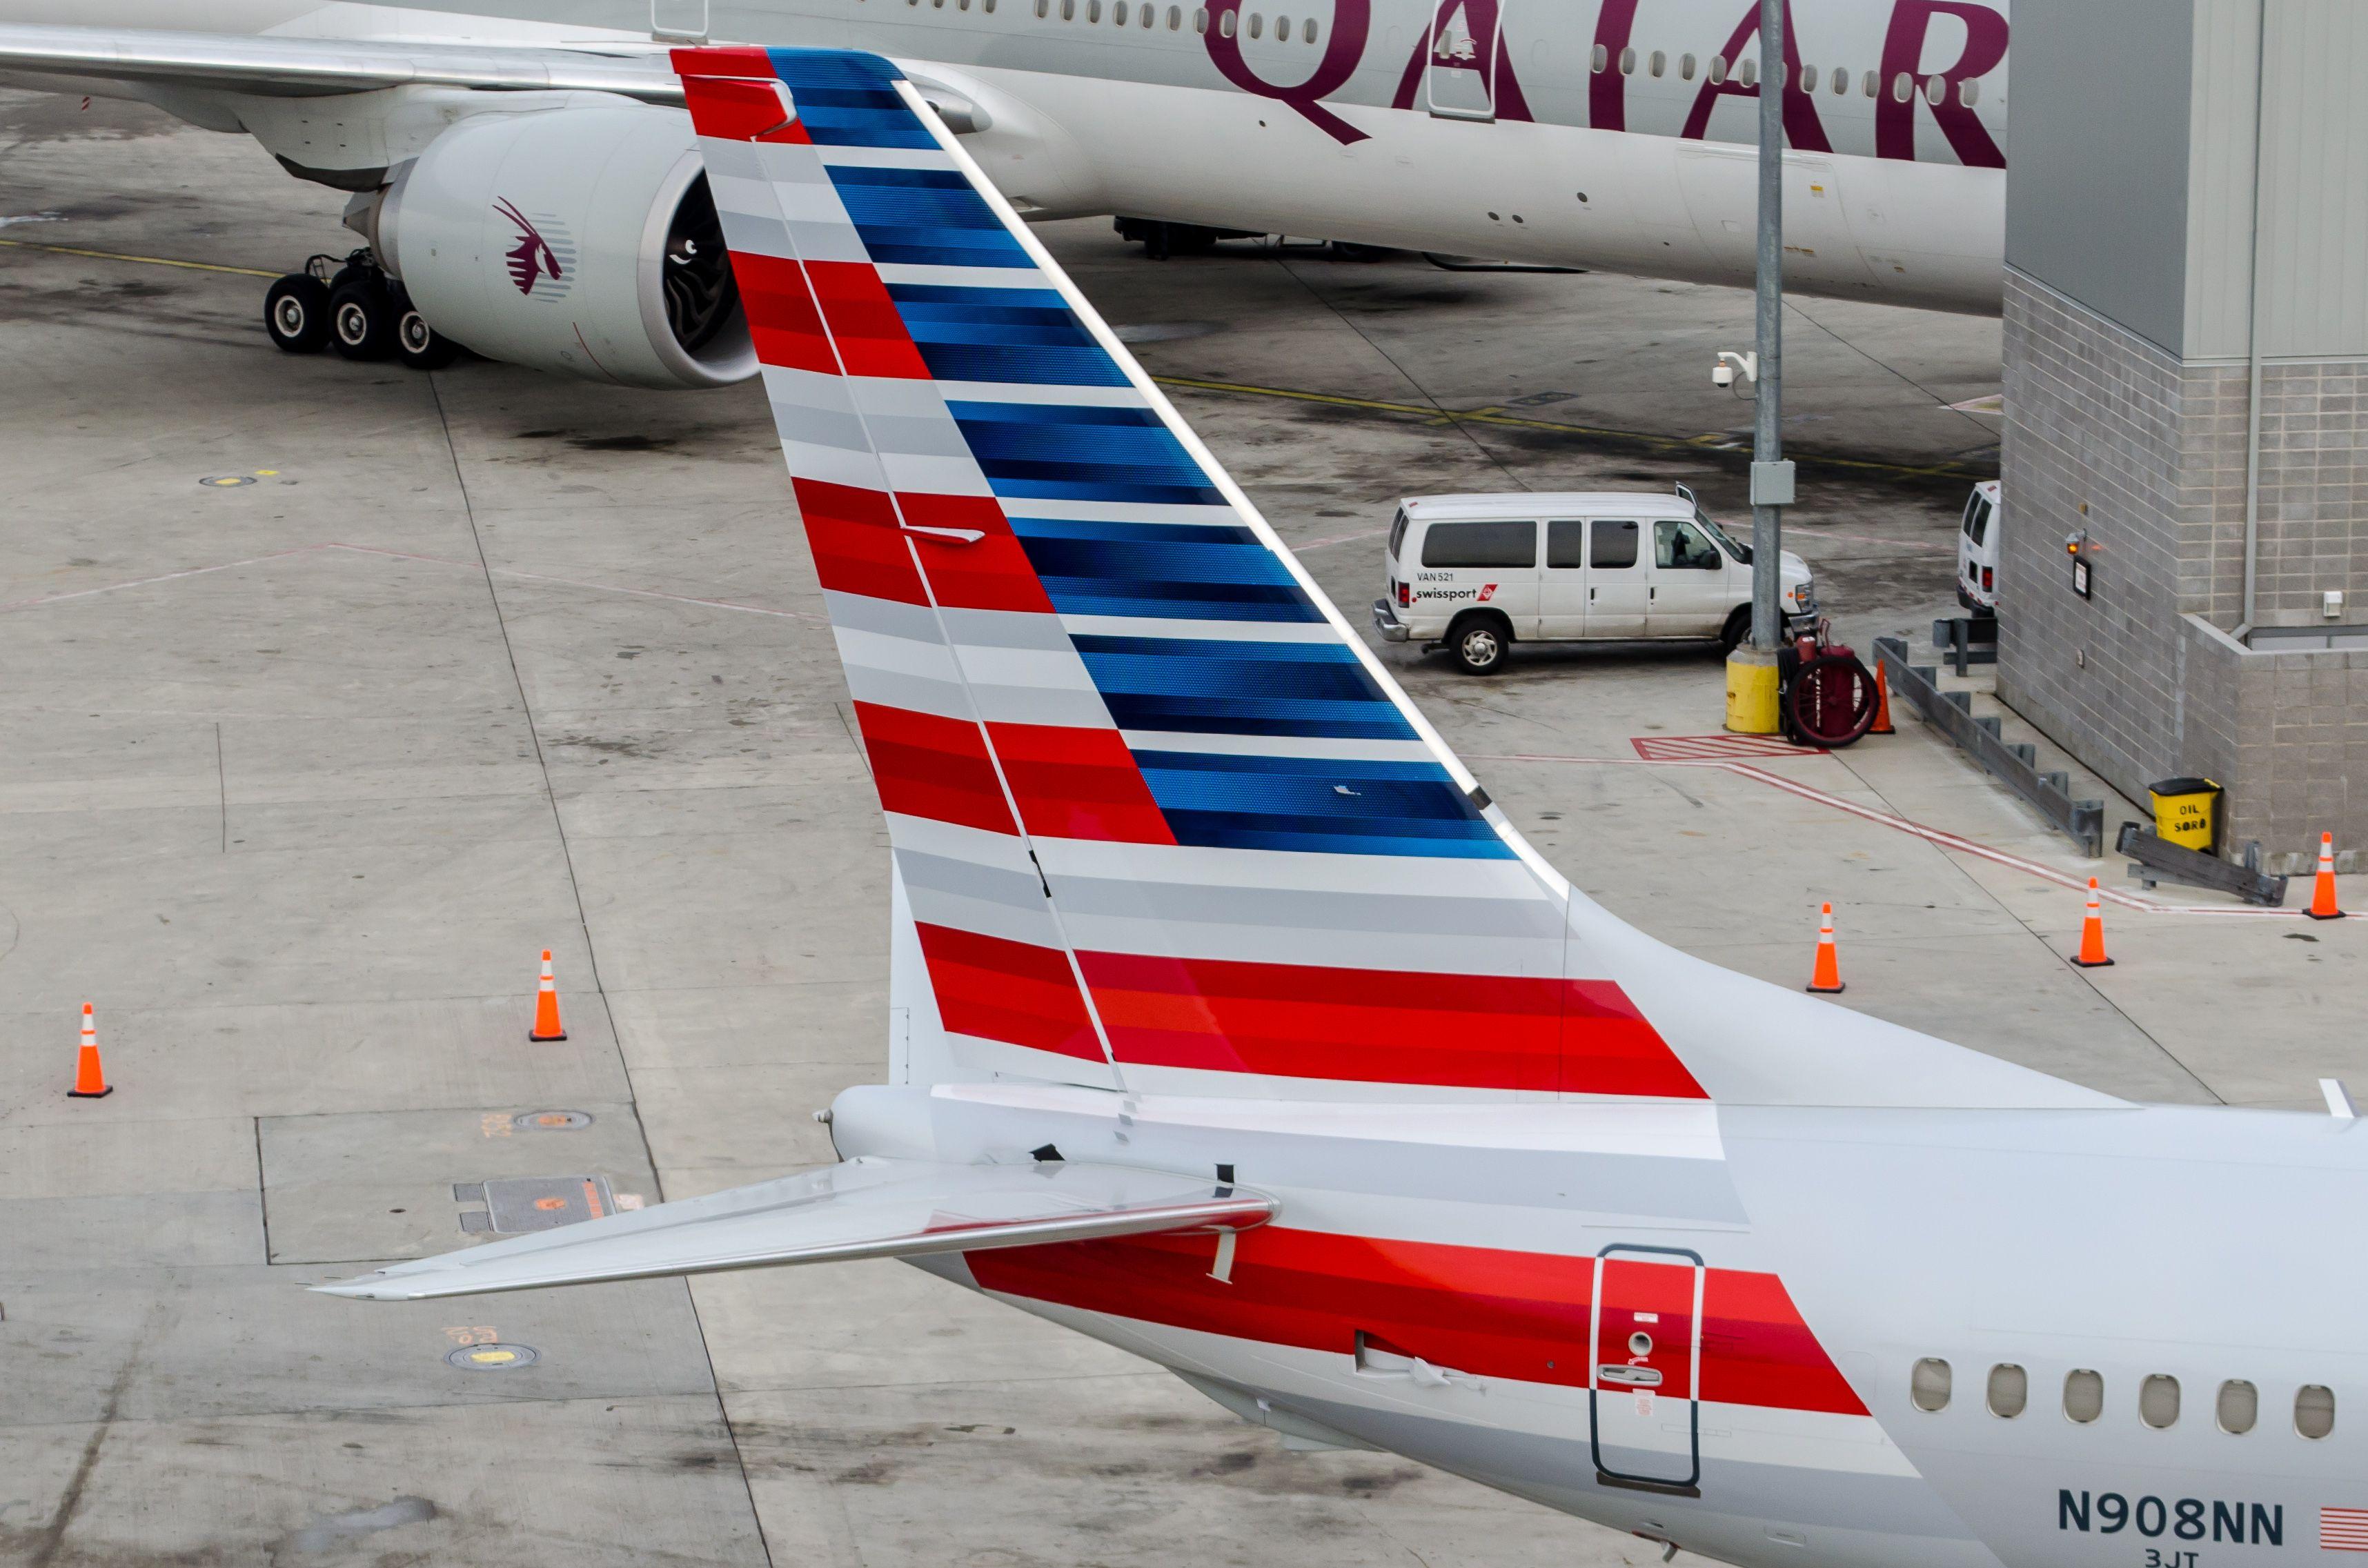 Airline with Red Swoosh Logo - Colgan Air and American Airlines Tail Logos